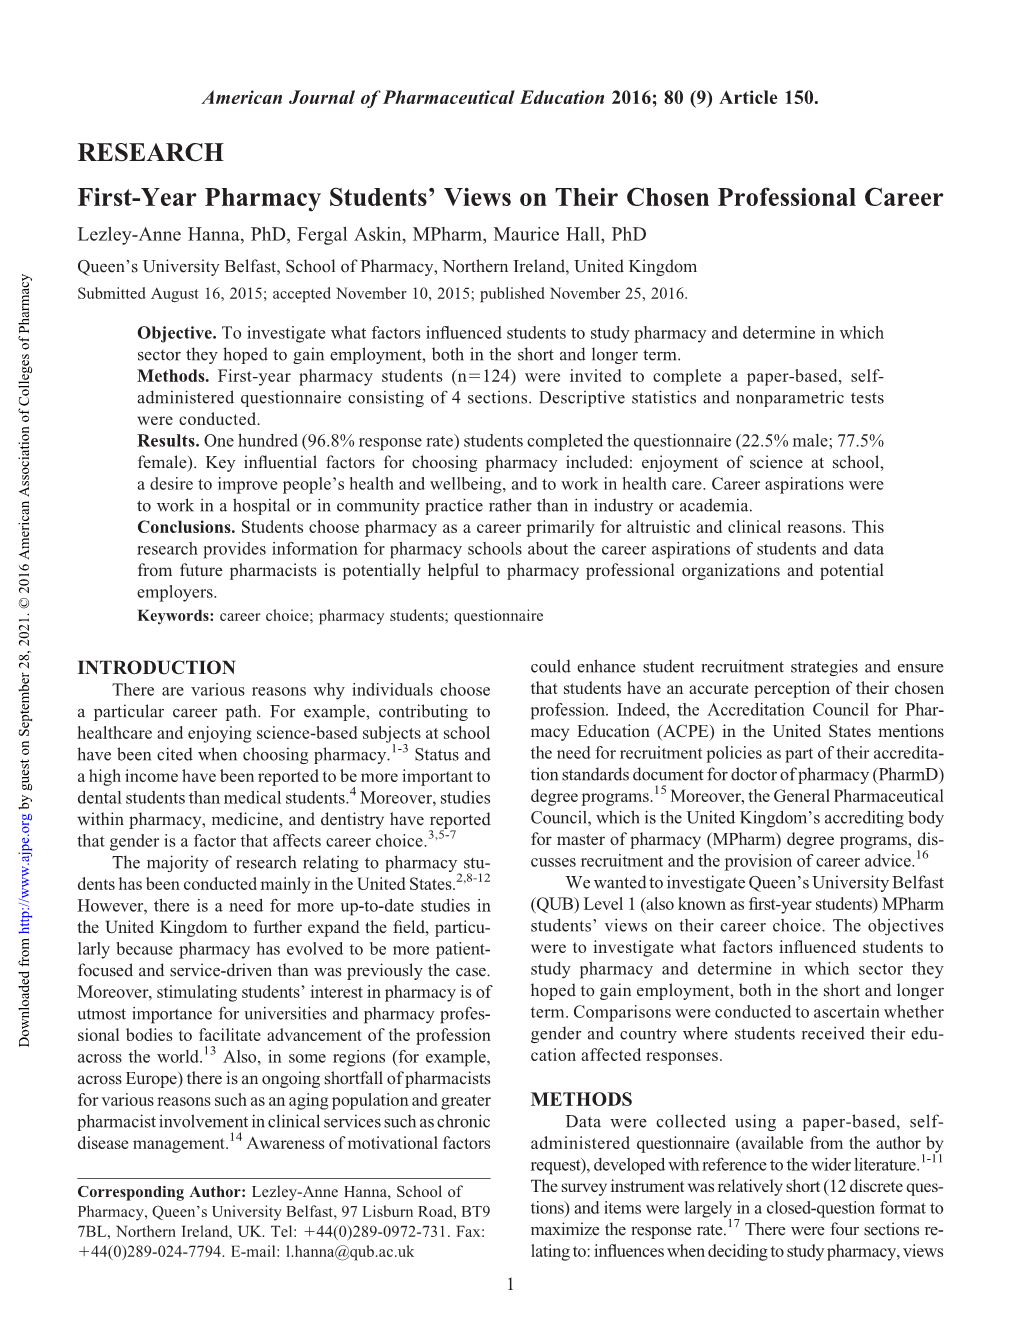 First-Year Pharmacy Students' Views on Their Chosen Professional Career